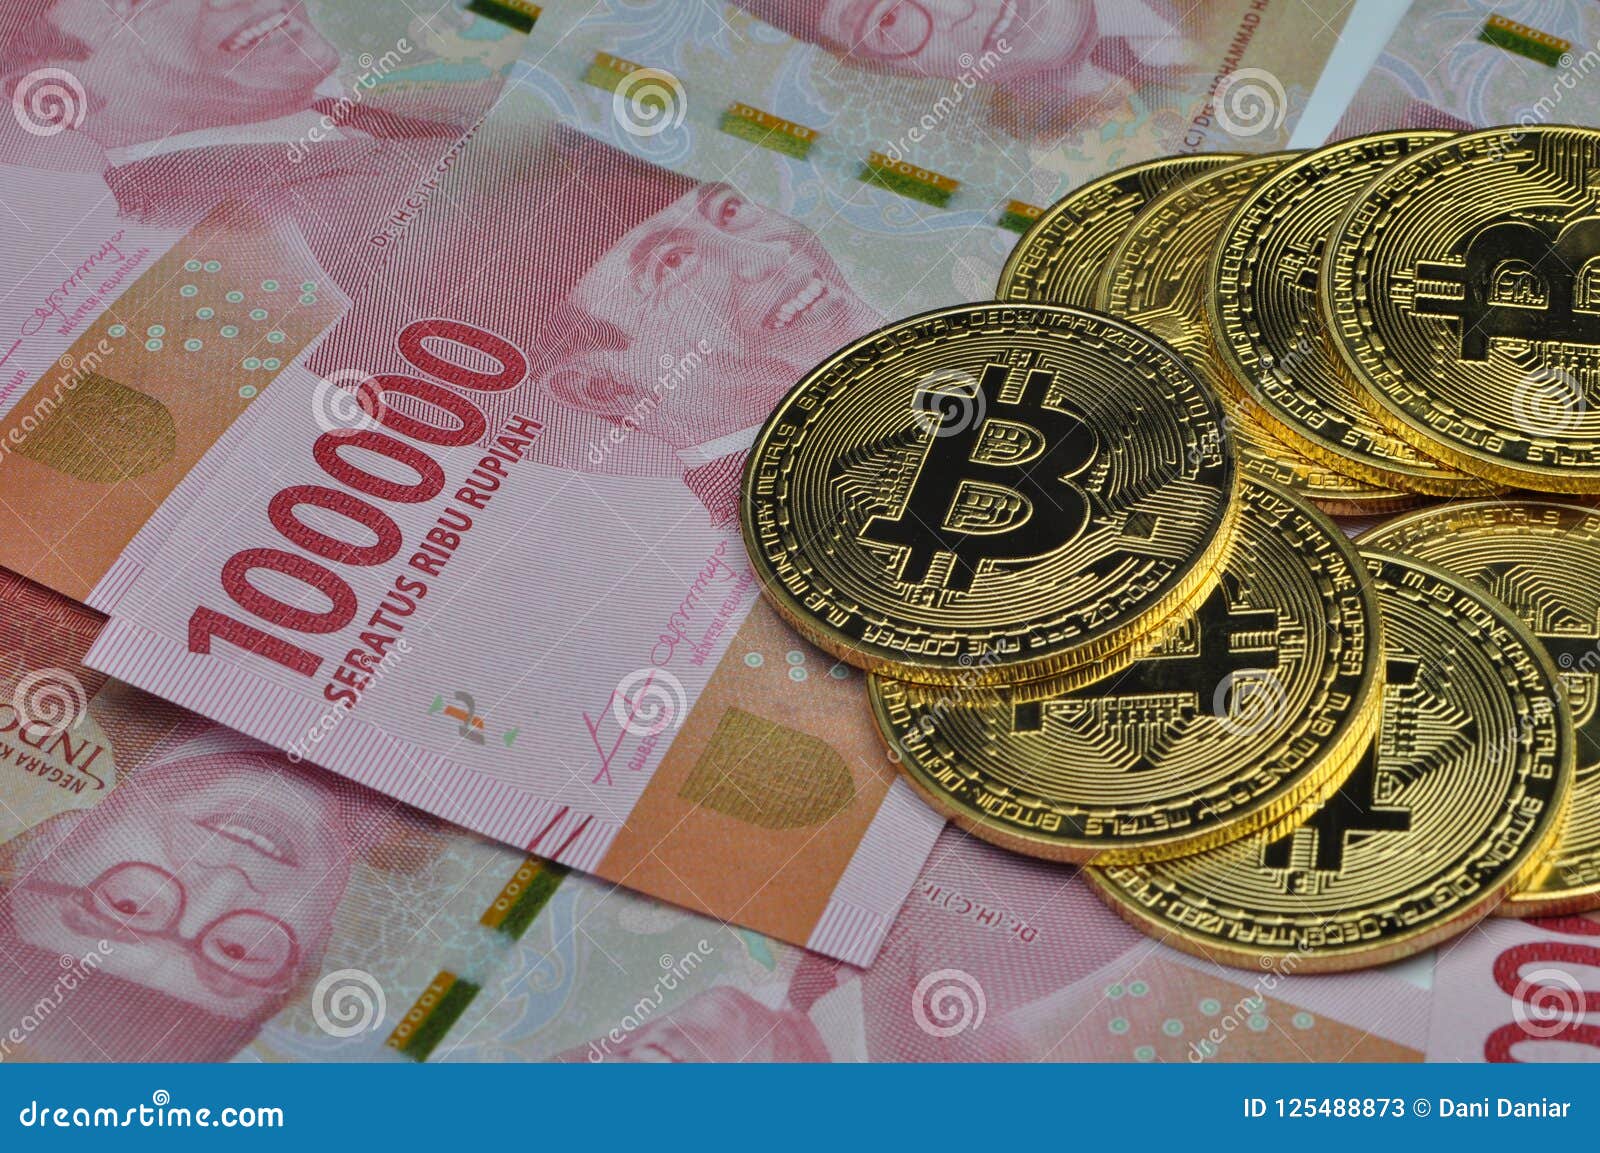 Bitcoin And Indonesia Rupiah Currency Stock Image - Image of 100000 ...